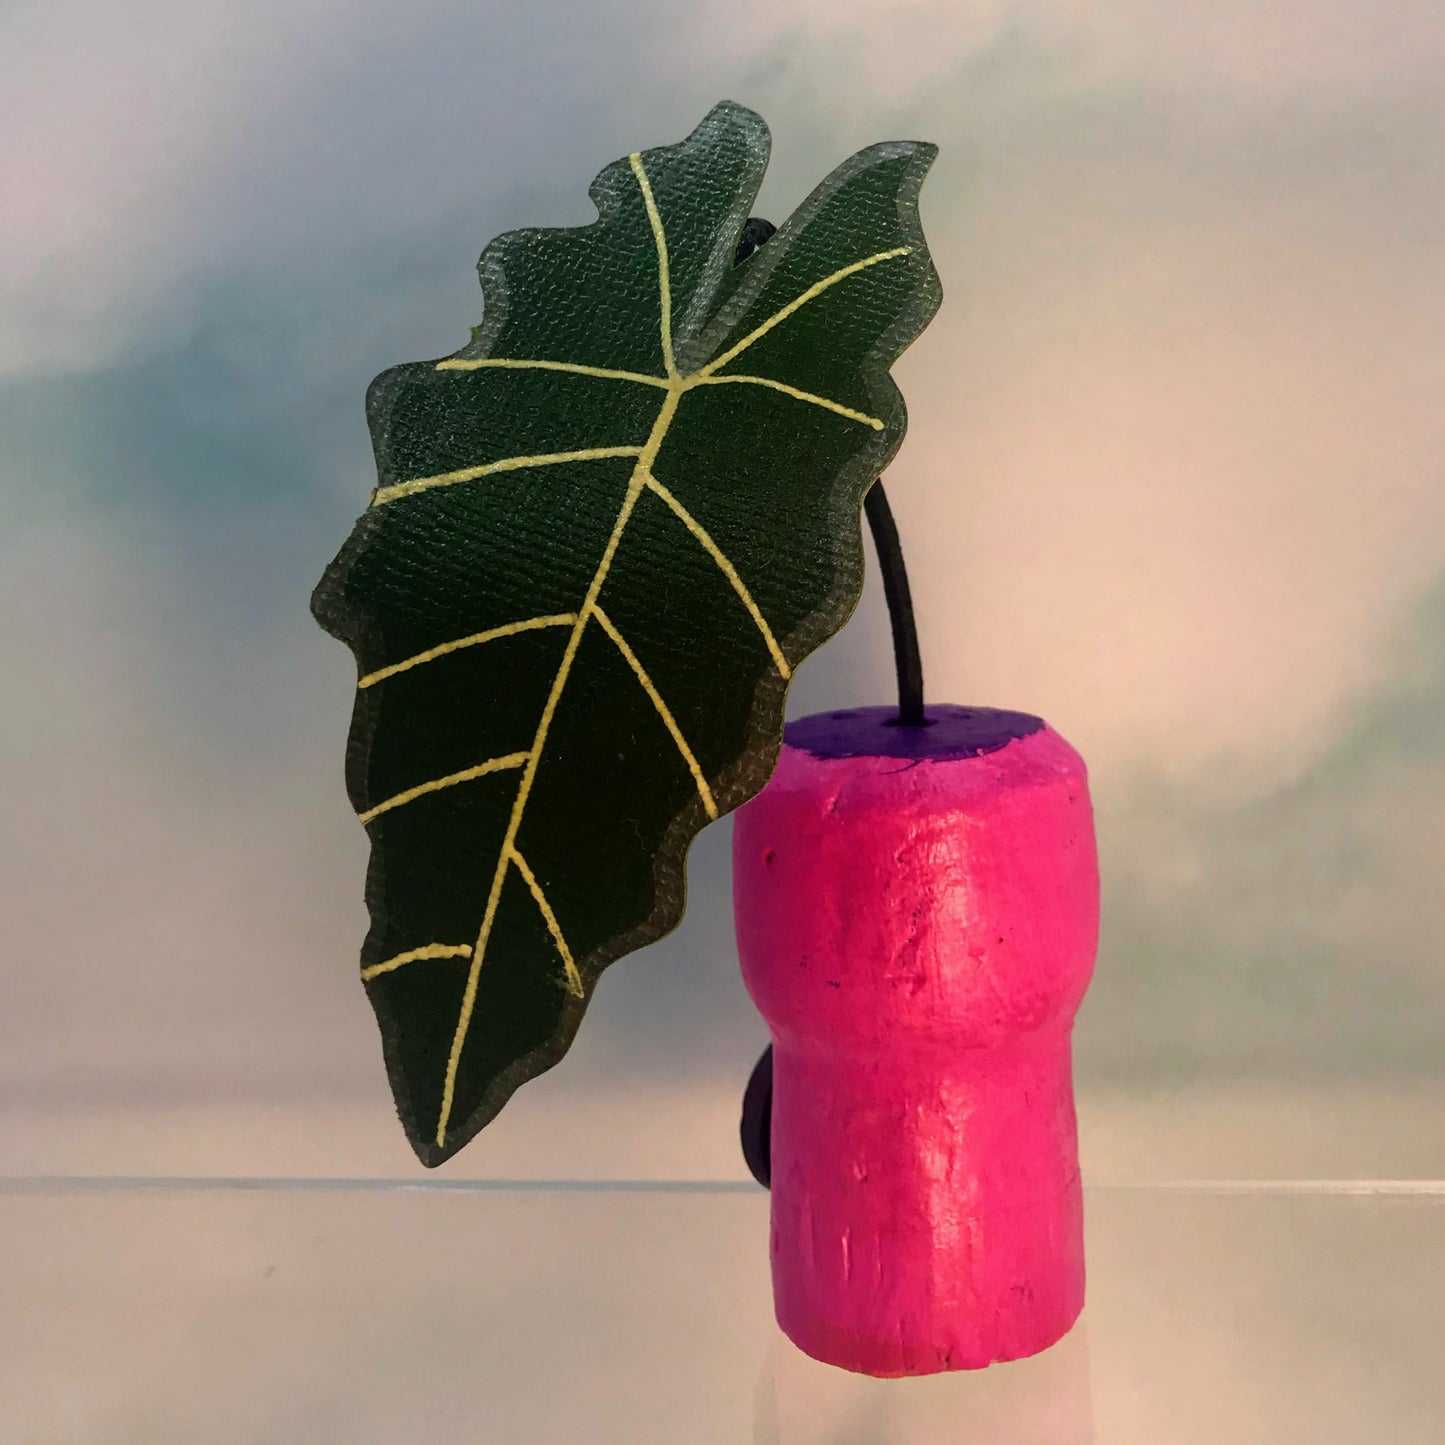 Cute Magical Alocasia Paper Plant in Hot Pink Upcycled Painted Cork- DECORATIVE MAGNET